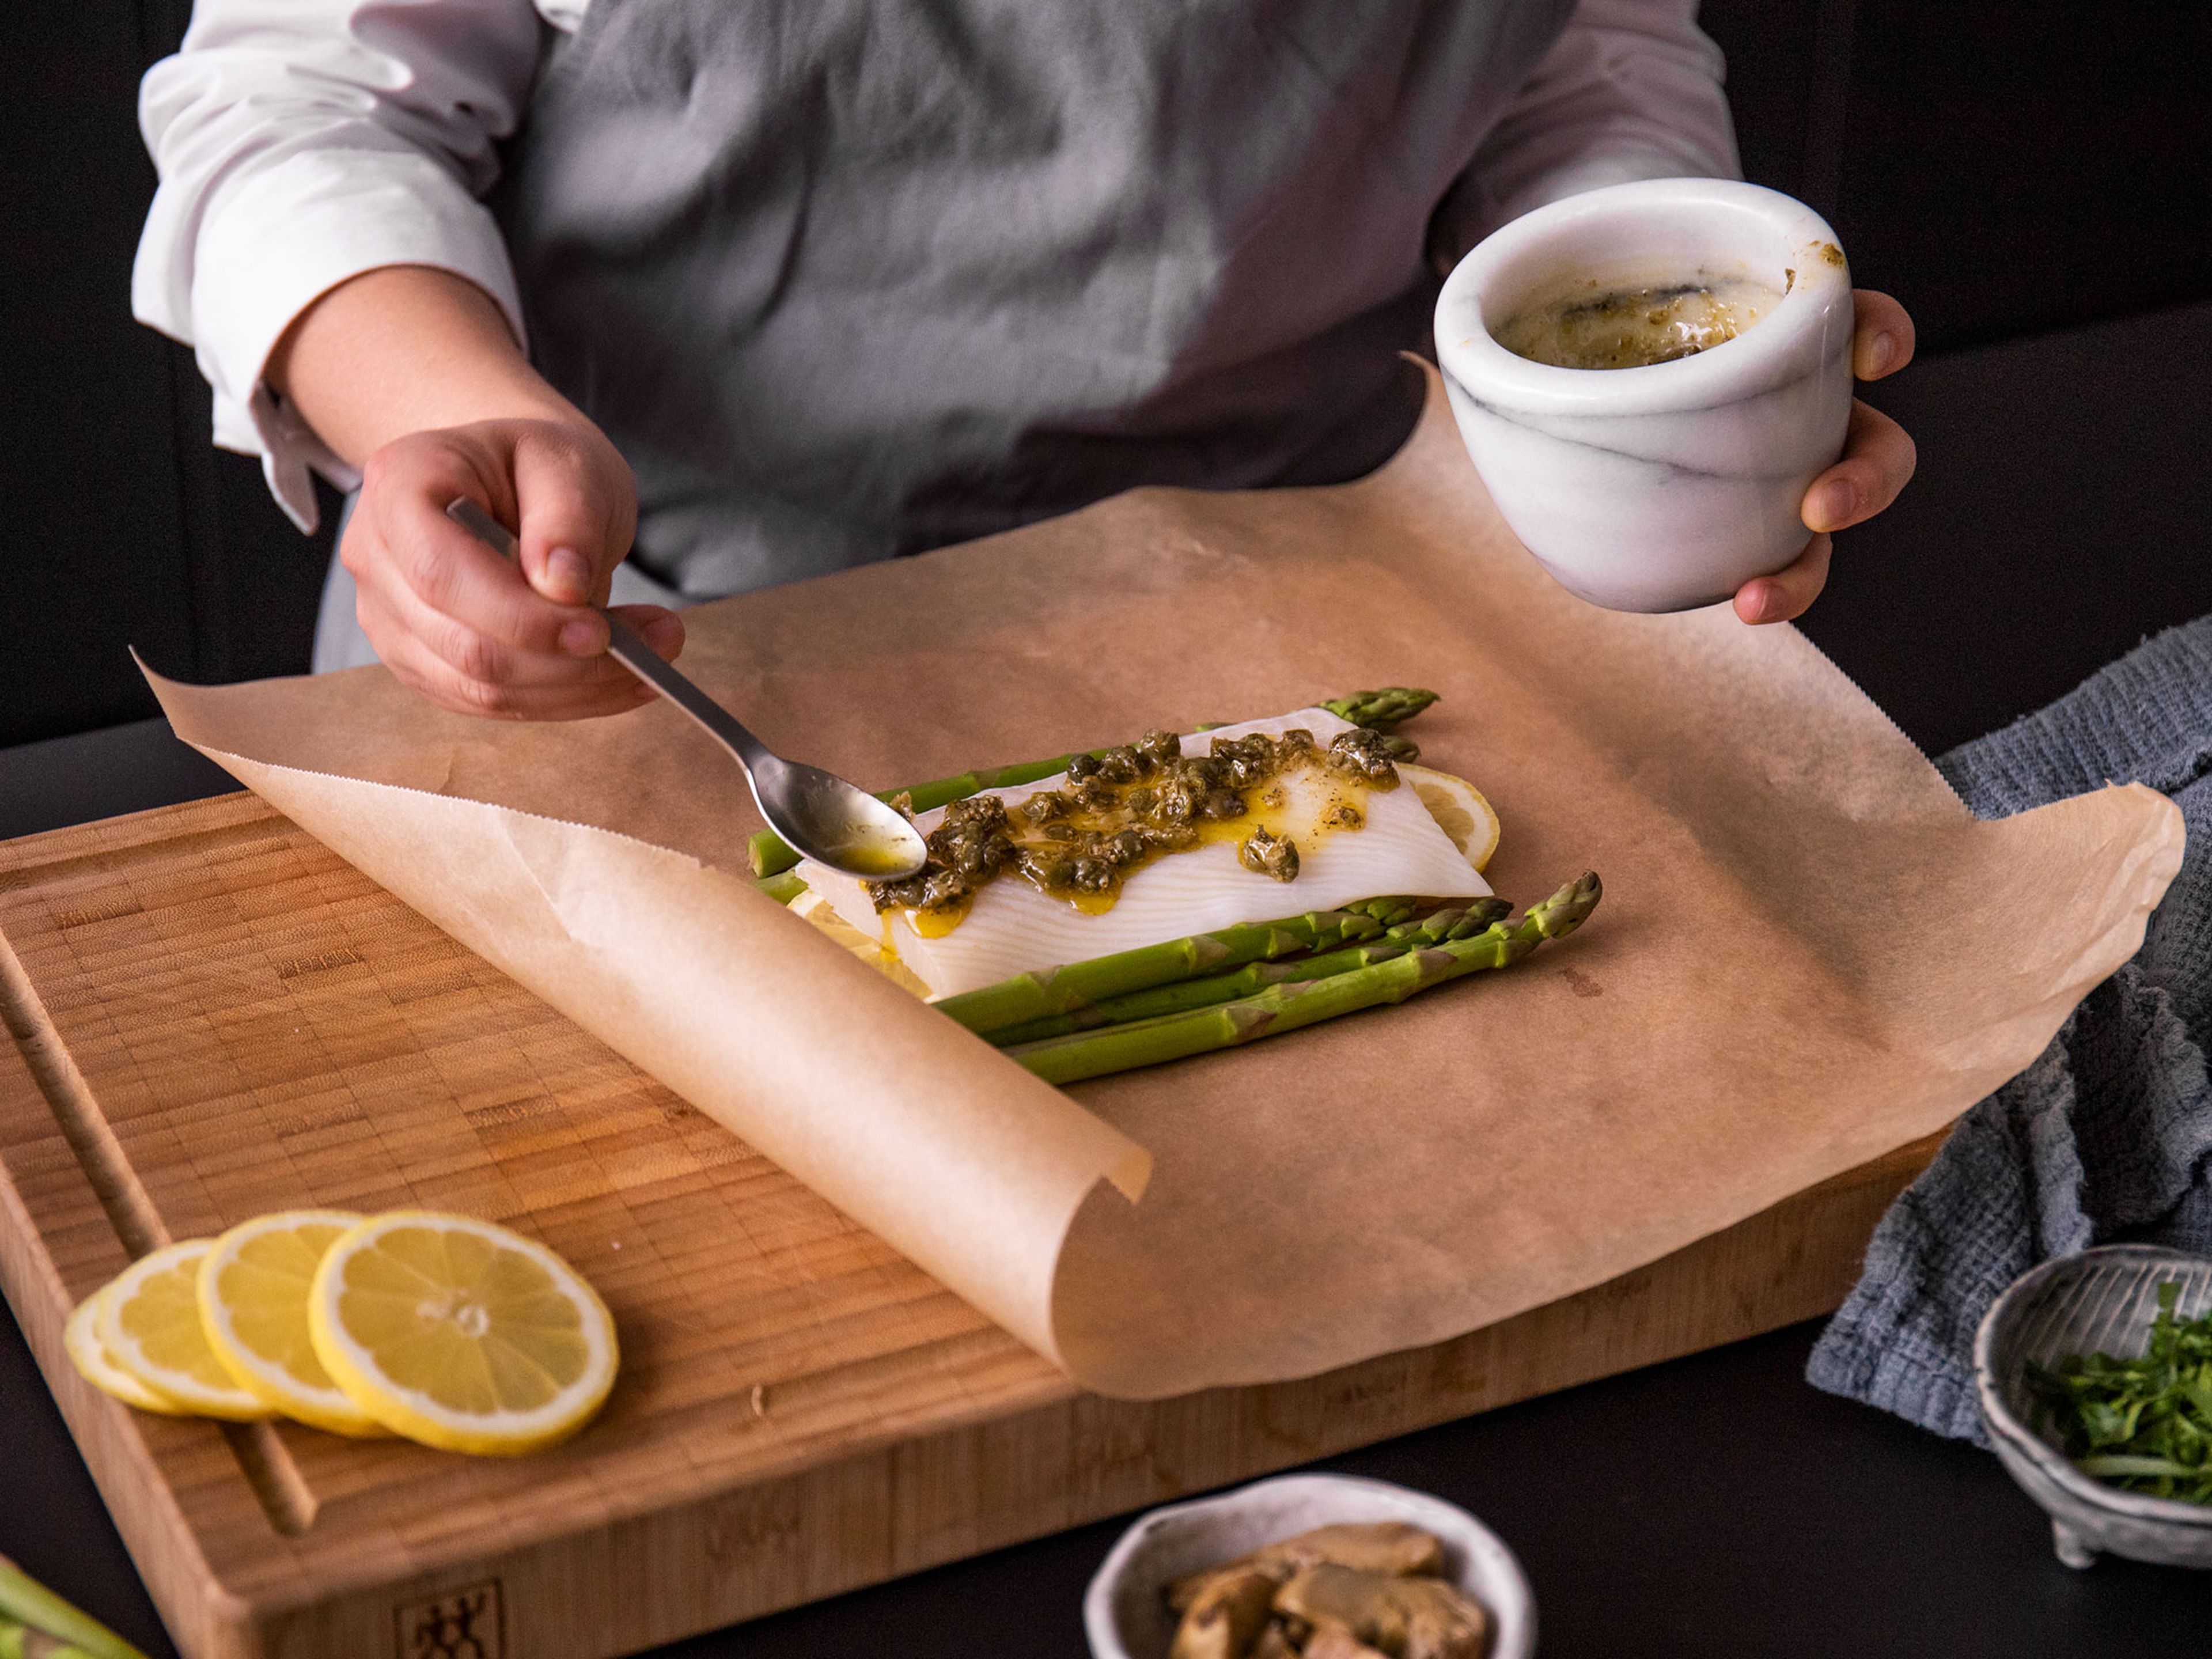 Lay half of the lemon slices on parchment paper with half of the asparagus, halibut fillet, half of the garlic-caper mixture, and half of the artichoke hearts. Fold into a parcel. Repeat with the remaining ingredients on another piece of parchment paper. Carefully transfer parchment parcels to a baking sheet and bake for approx. 15 – 20 min. Delicately open the parchment parcels and top with parsley before serving. Enjoy!